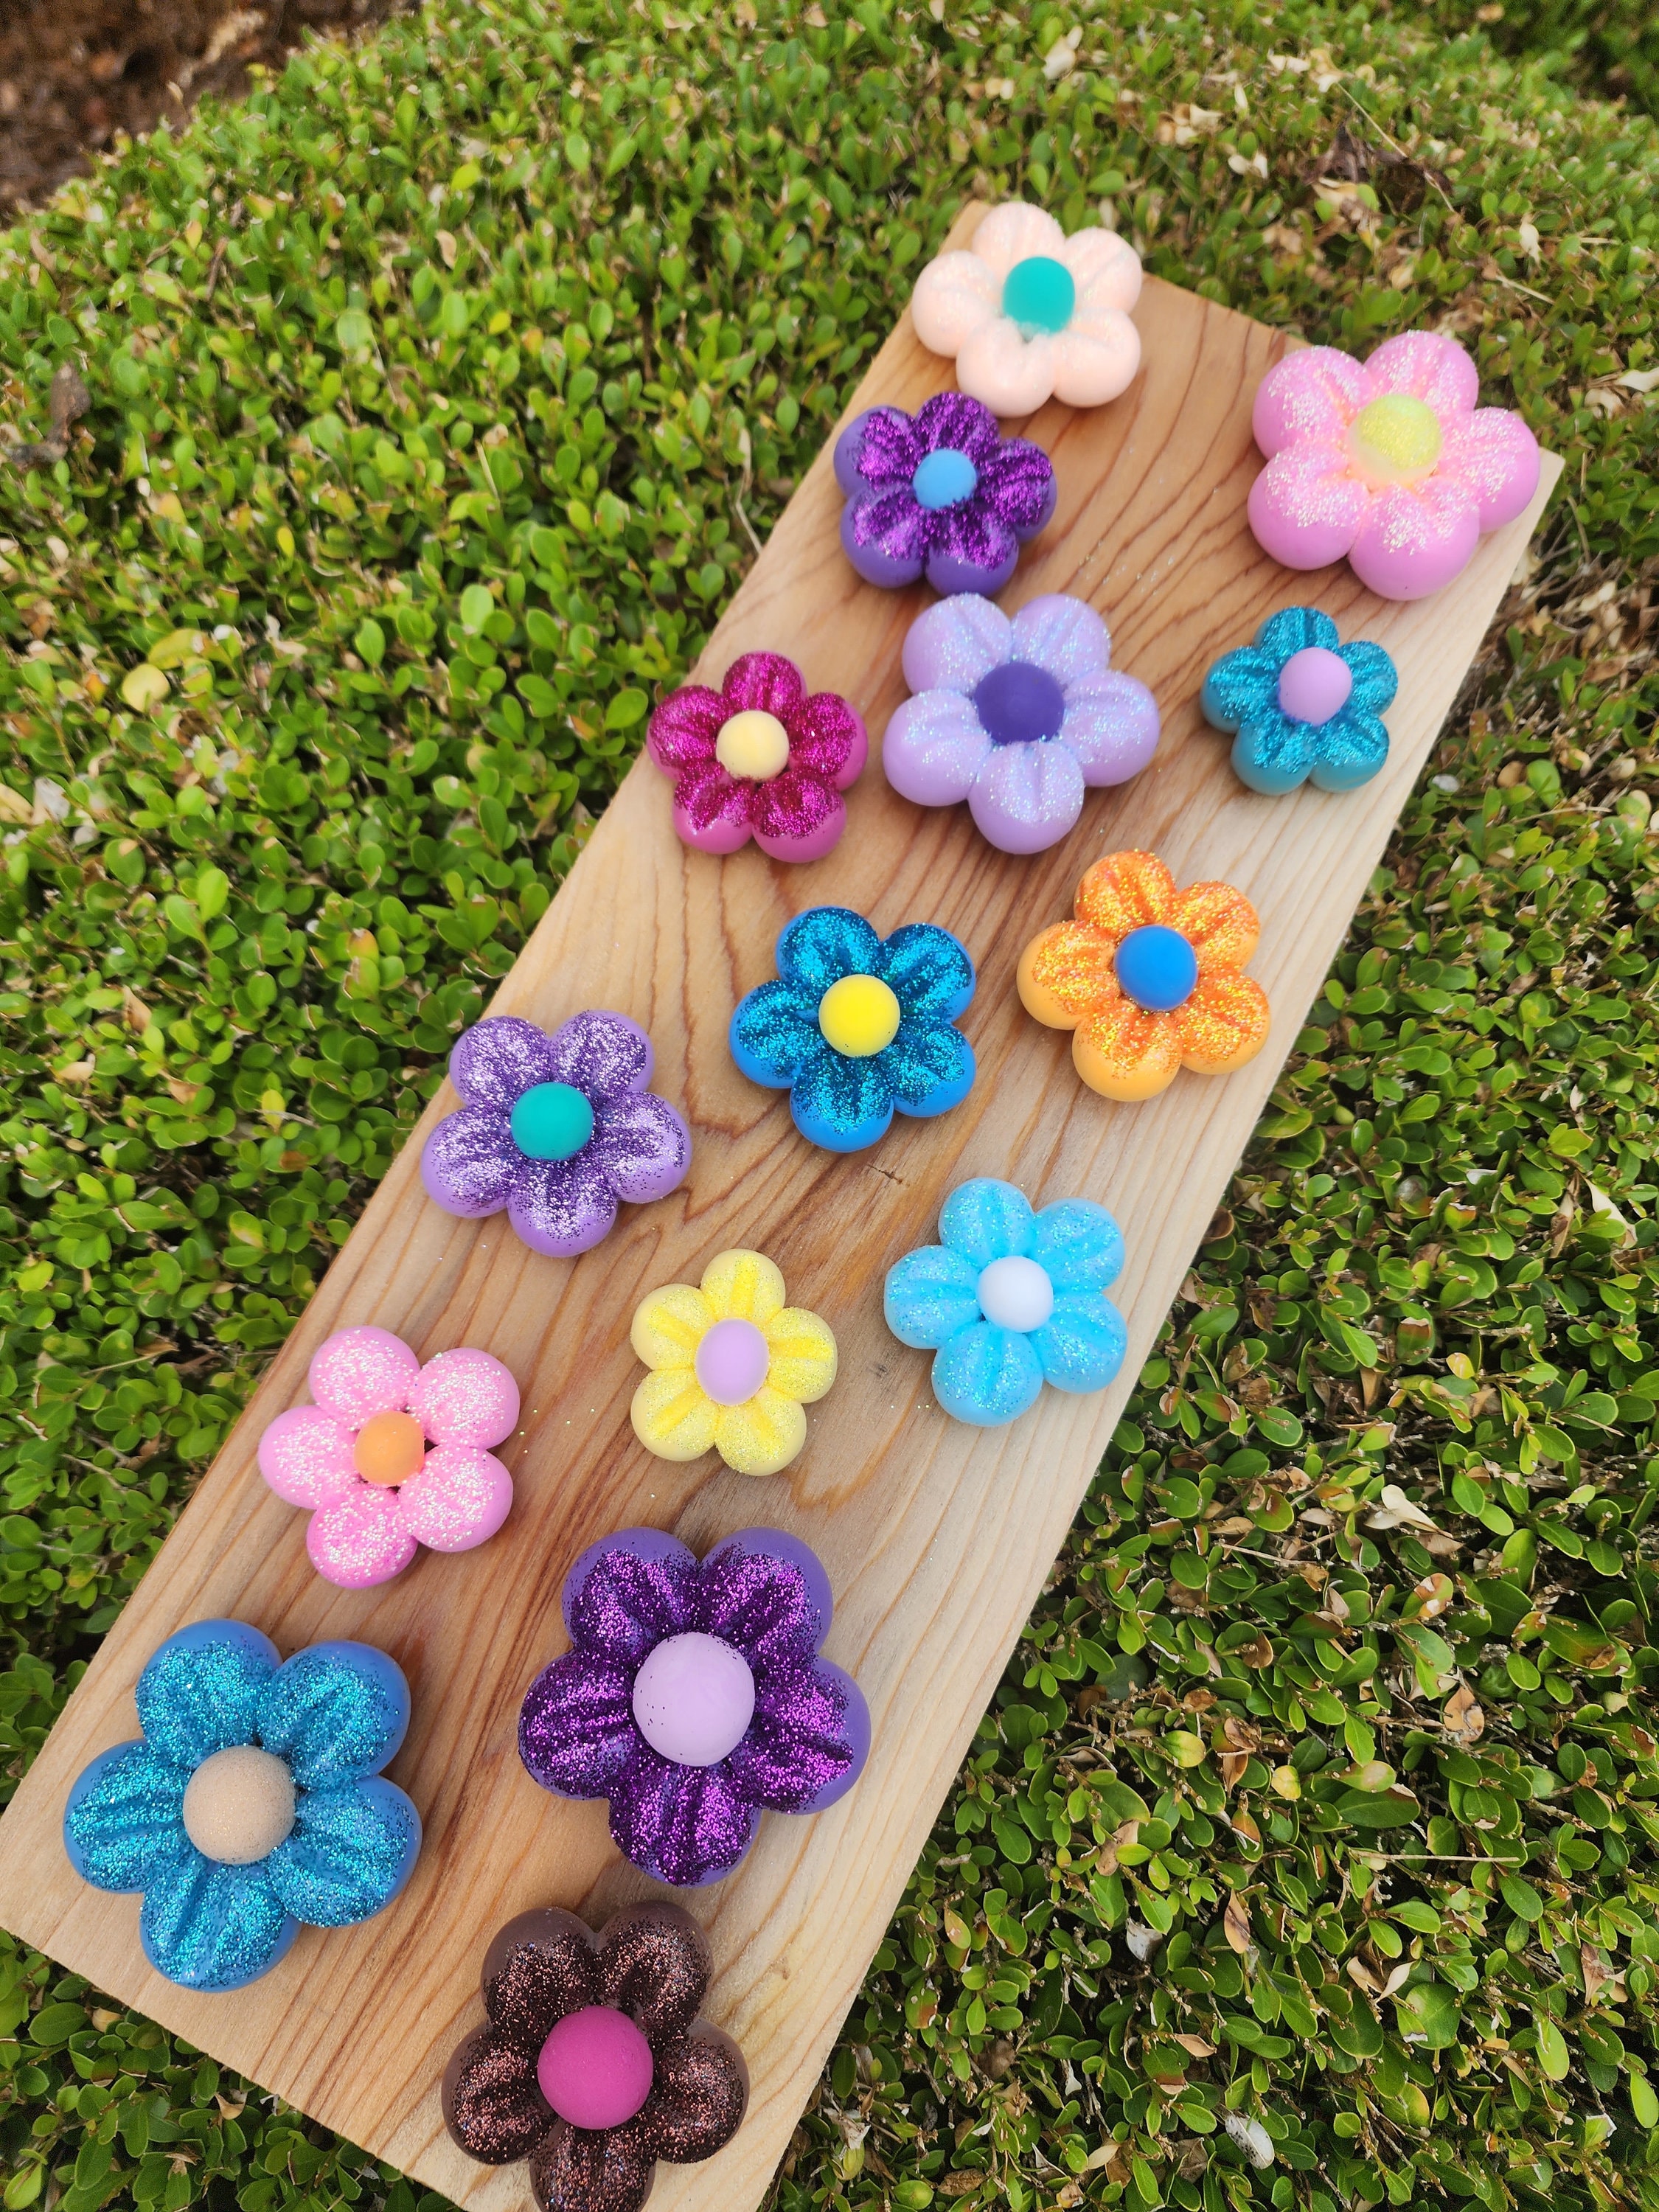 Clay Flowers Patterns: Crafting Clay Flowers Projects At Home See more